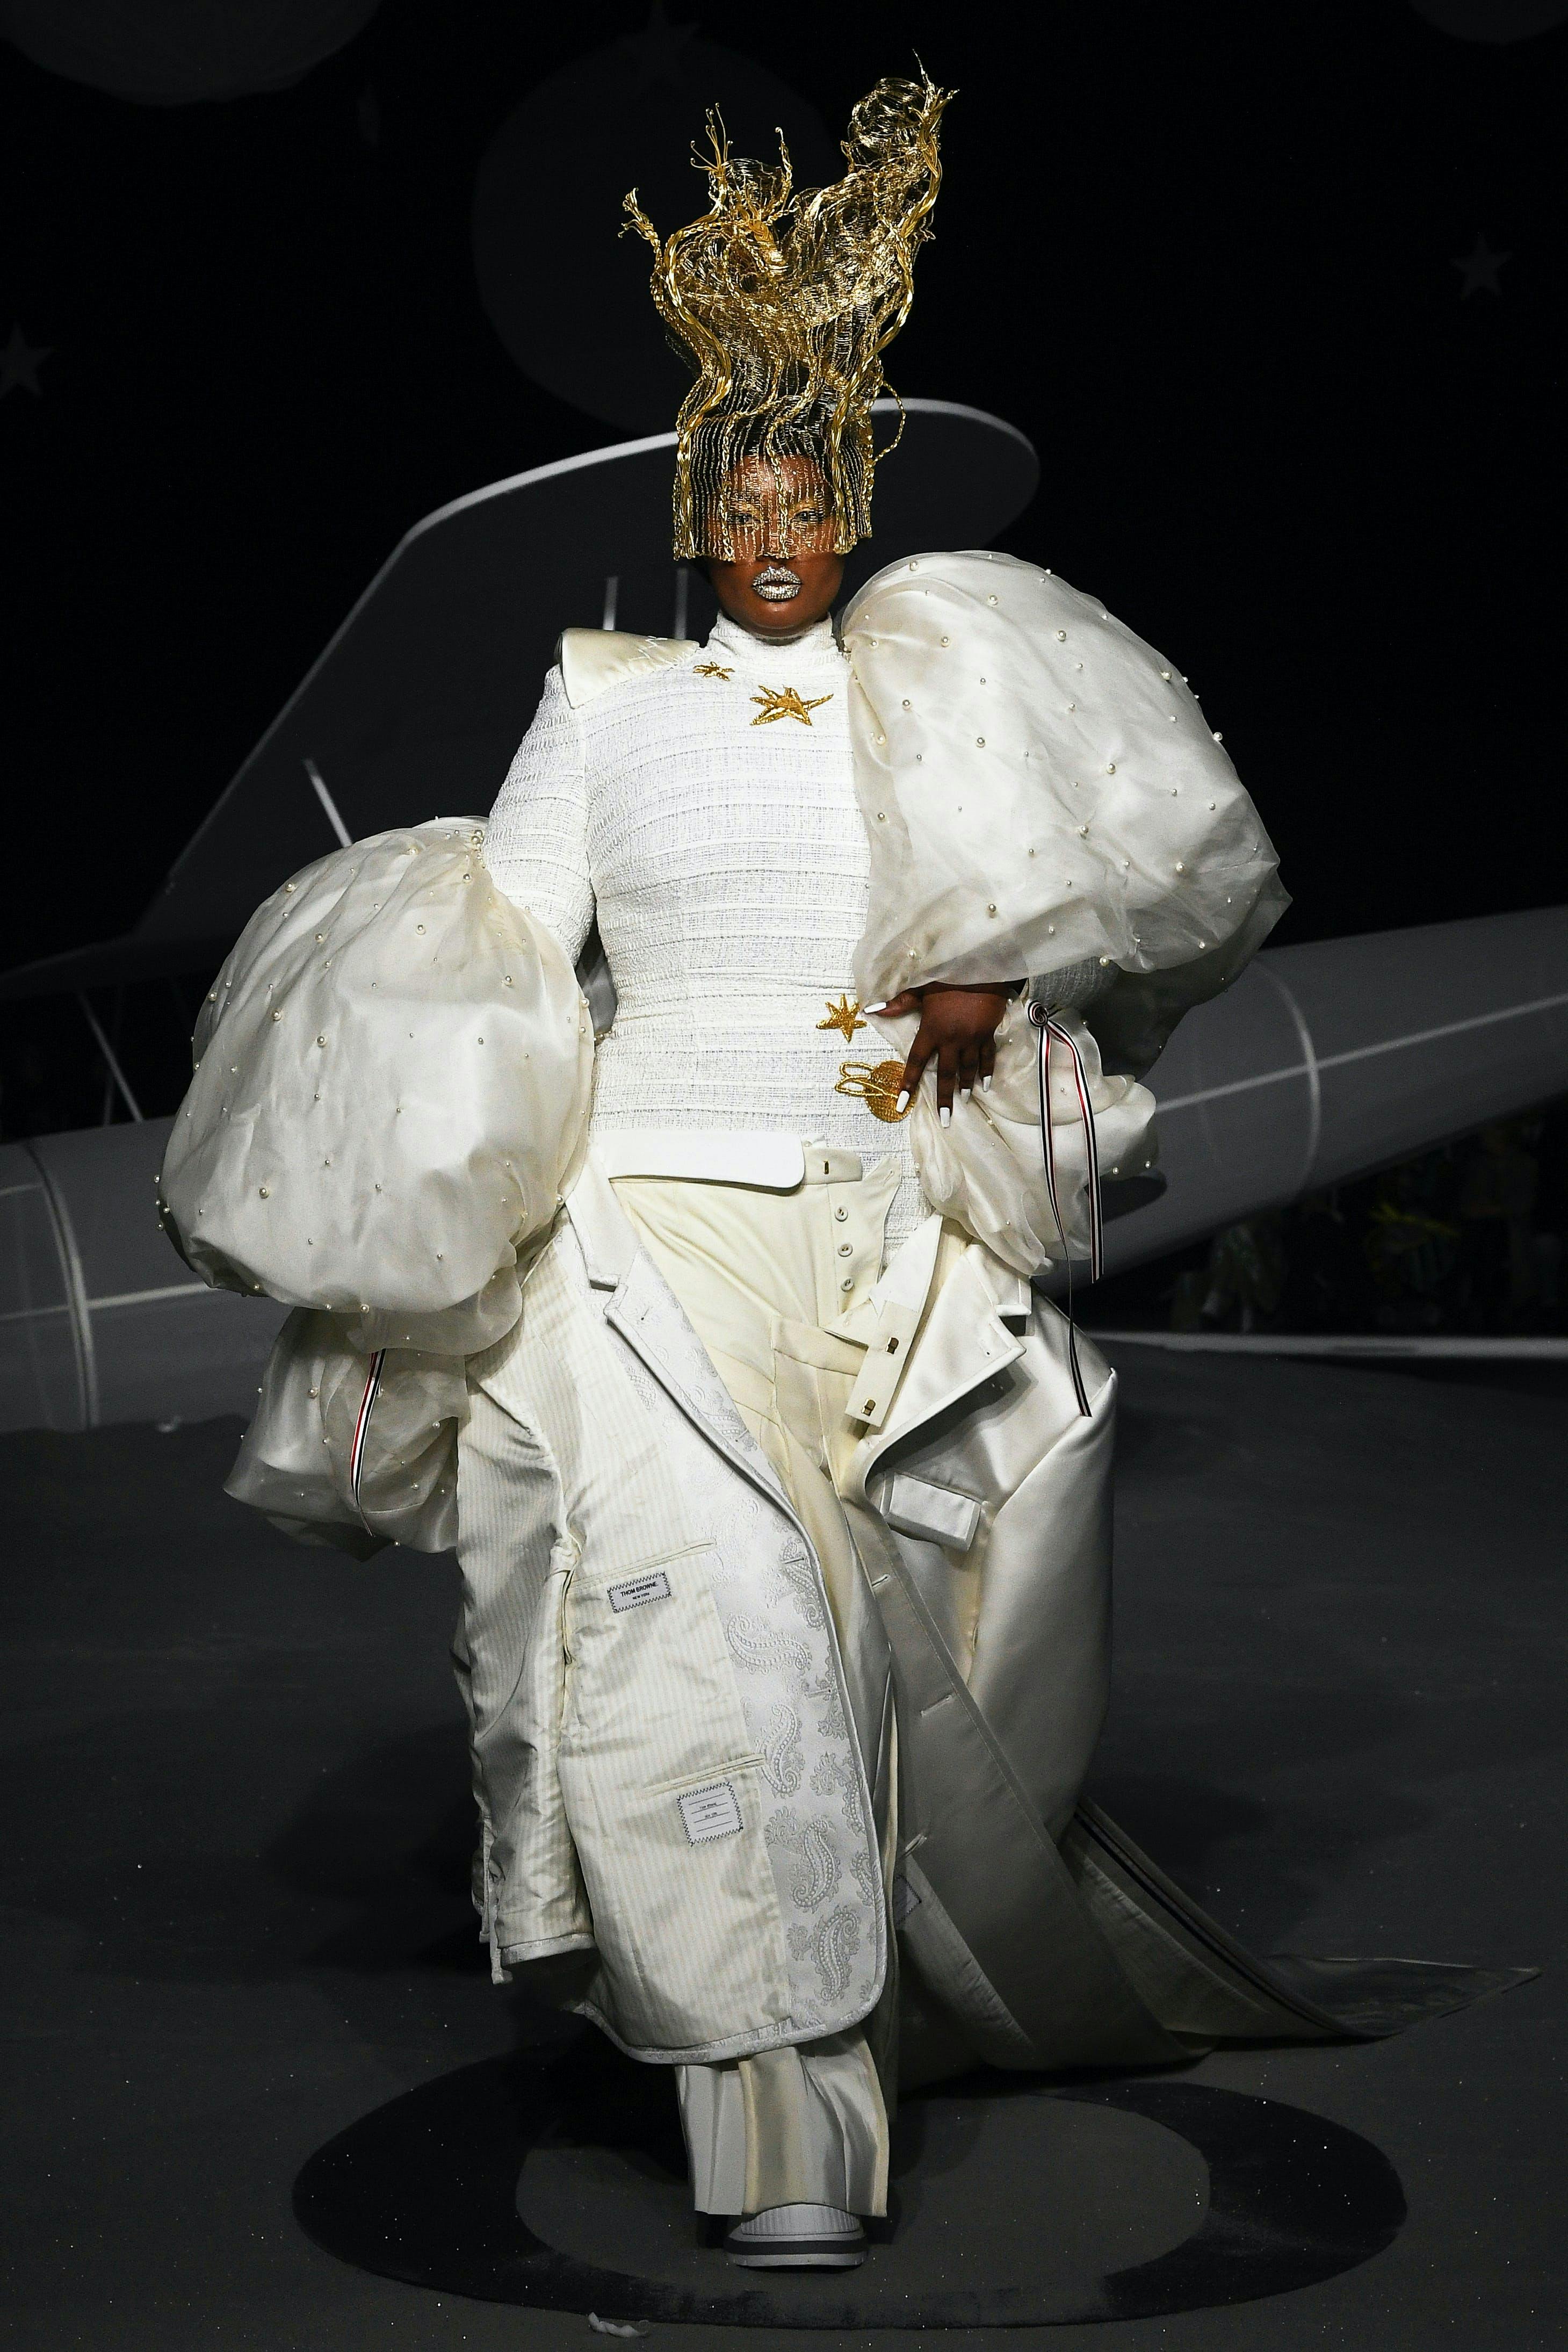 A model in a white outragoes Thom Browne runway look.